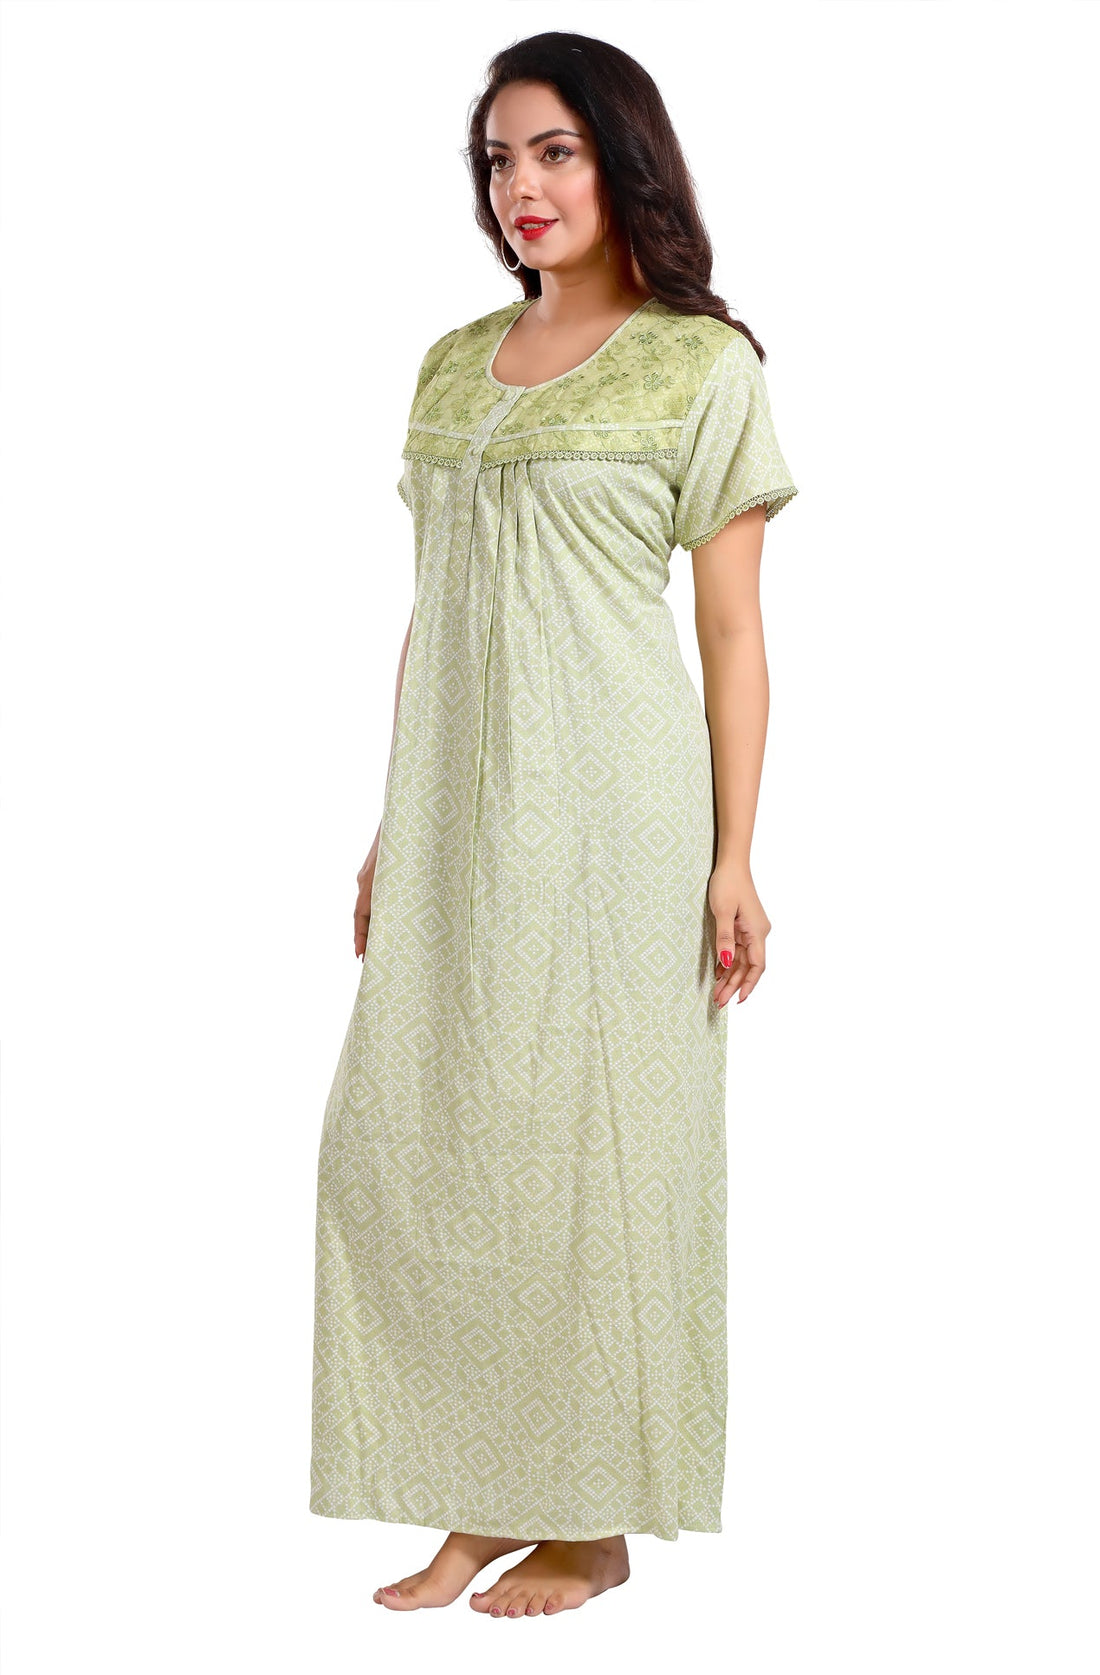 Cotton Frills Light Green Floral Neck Netted SkinStory Nighty (Copy)